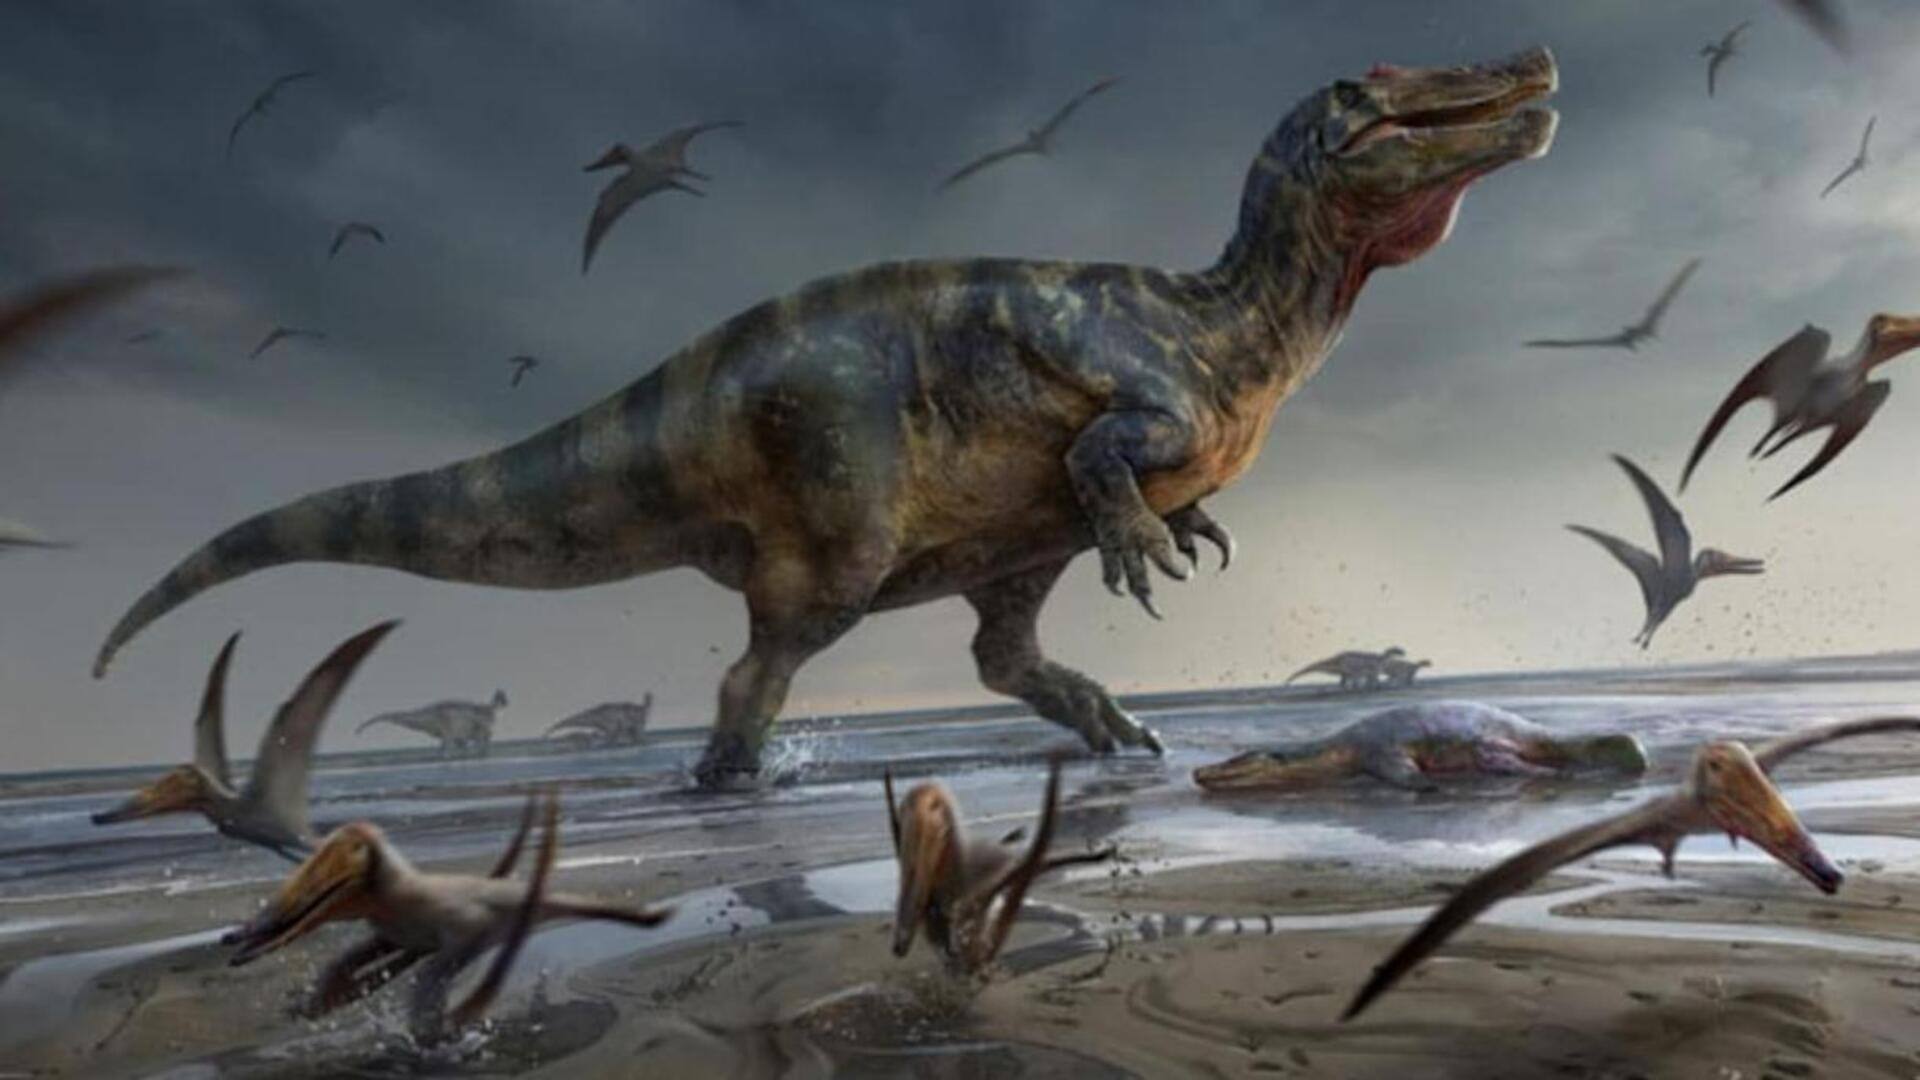 This interactive website shows dinosaurs that roamed your neighborhood